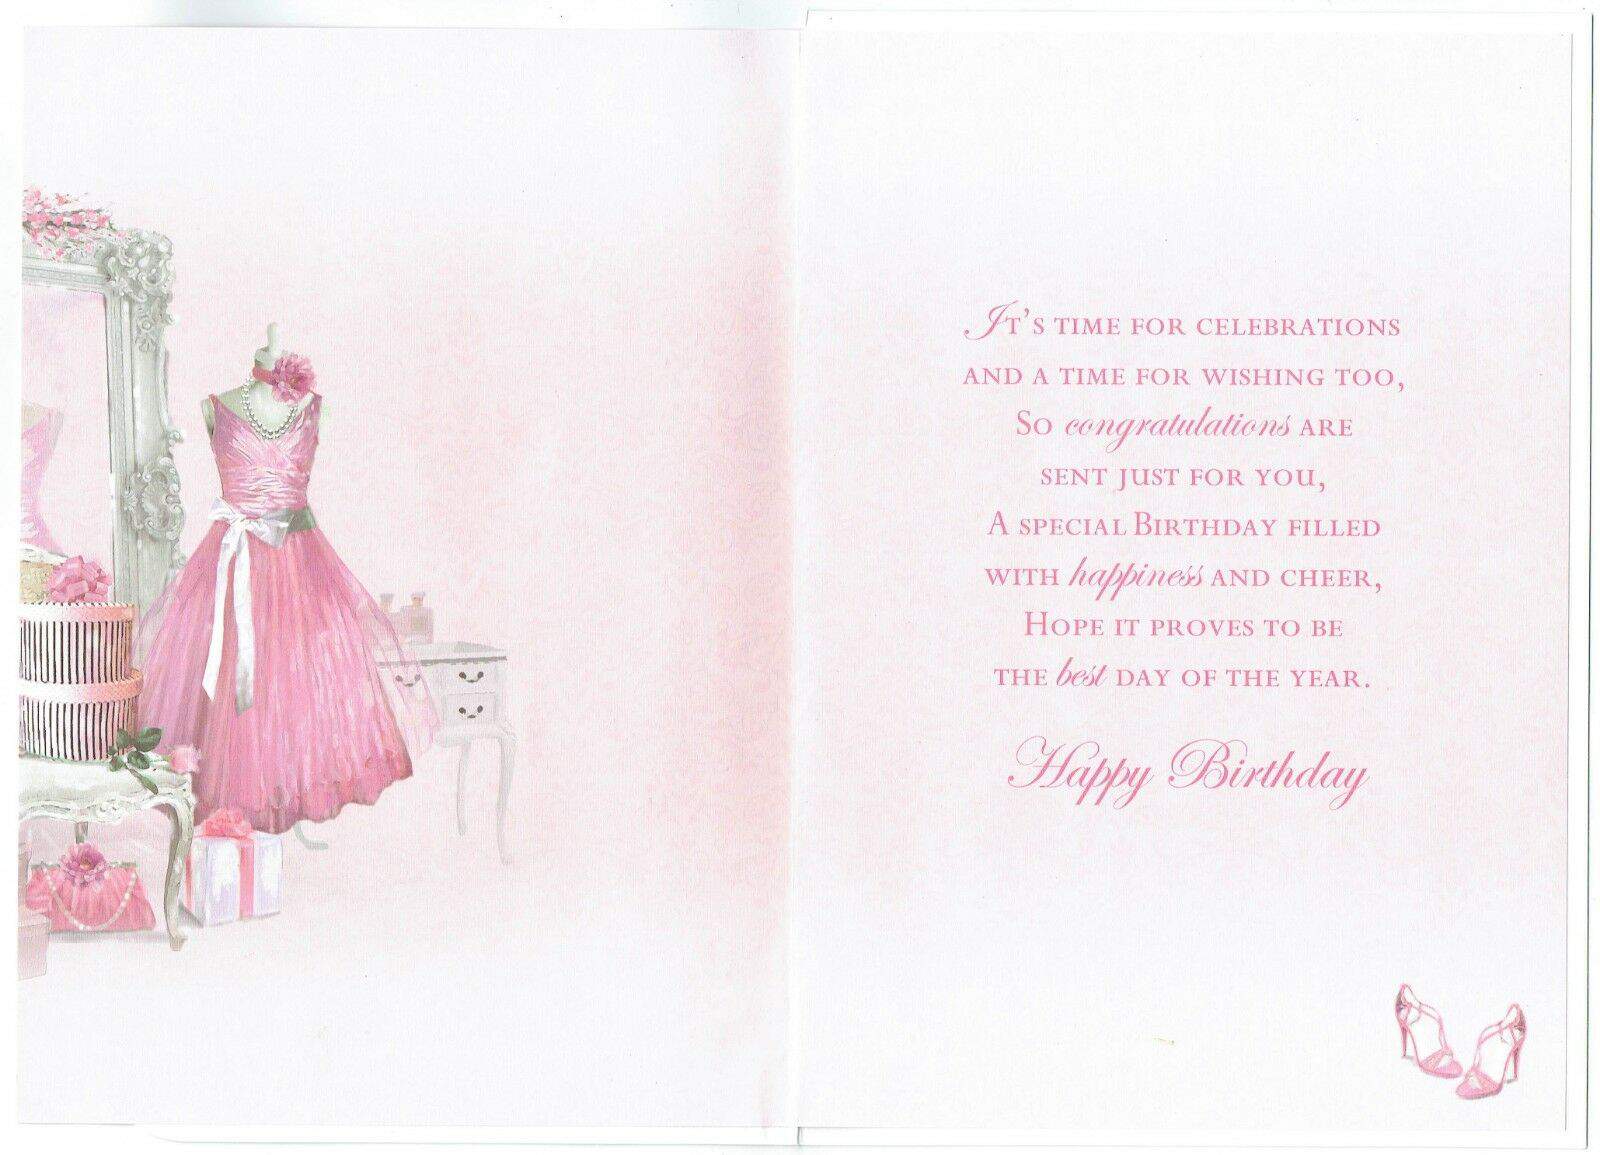 Daughter Birthday Card With Pink Mannequin Dress And Sentiment Verse 